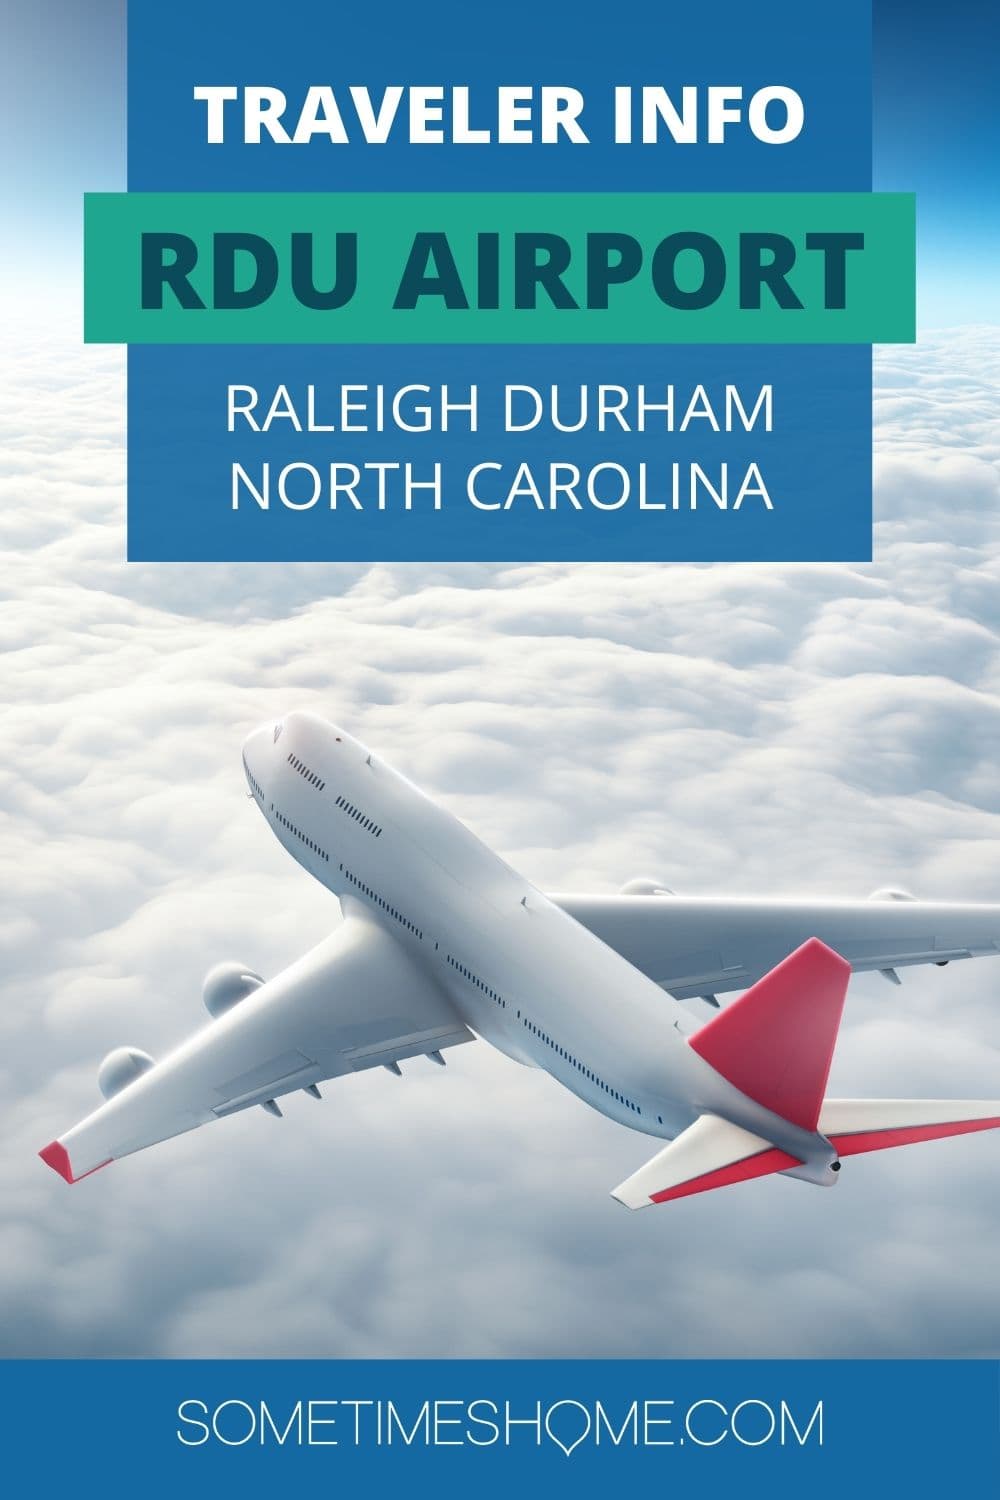 Traveler info for RDU Airport in Raleigh Durham North Carolina with a photo of a plane in the clouds.